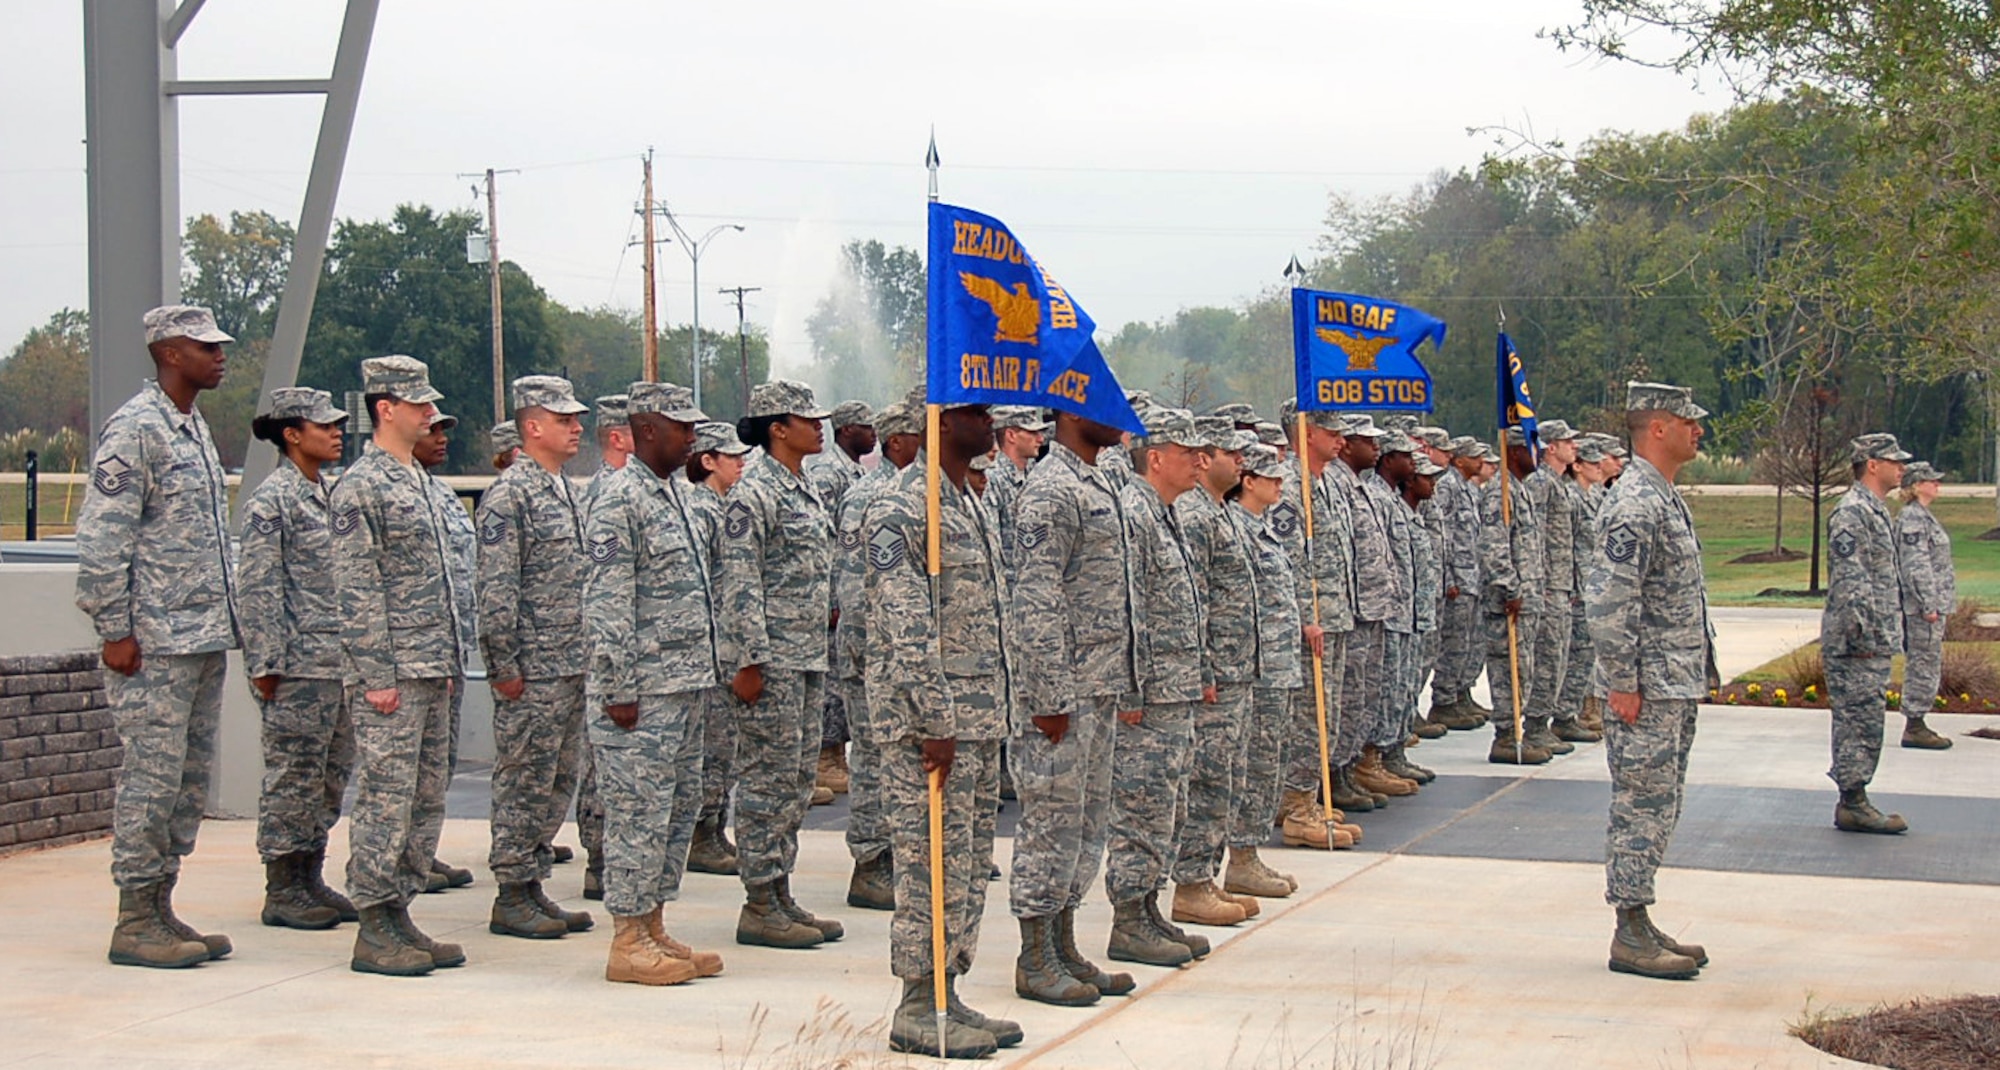 BOSSIER CITY, La. - Members of Headquarters Eighth Air Force stand in formation before the Headquarters Eighth Air Force retreat ceremony at the Cyber Innovation Center in Bossier City, La., Nov. 3, 2010, to commemorate the day in Eighth Air Force history. On Nov. 3, 1943, Eighth Air Force dispatched more than 500 B-17 Flying Fortresses and B-24 Liberators to Wilhelmshaven, a German port along the North Sea, with the primary mission of striking U-boat construction yards in the area. This was the first “500 bomber strike” conducted by Eighth Air Force and the mission showcased the growing air power of the “Mighty Eighth” and highlighted its innovation spirit in employing new technology in combat. (U.S. Air Force photo by Staff Sgt. Brian Stives)